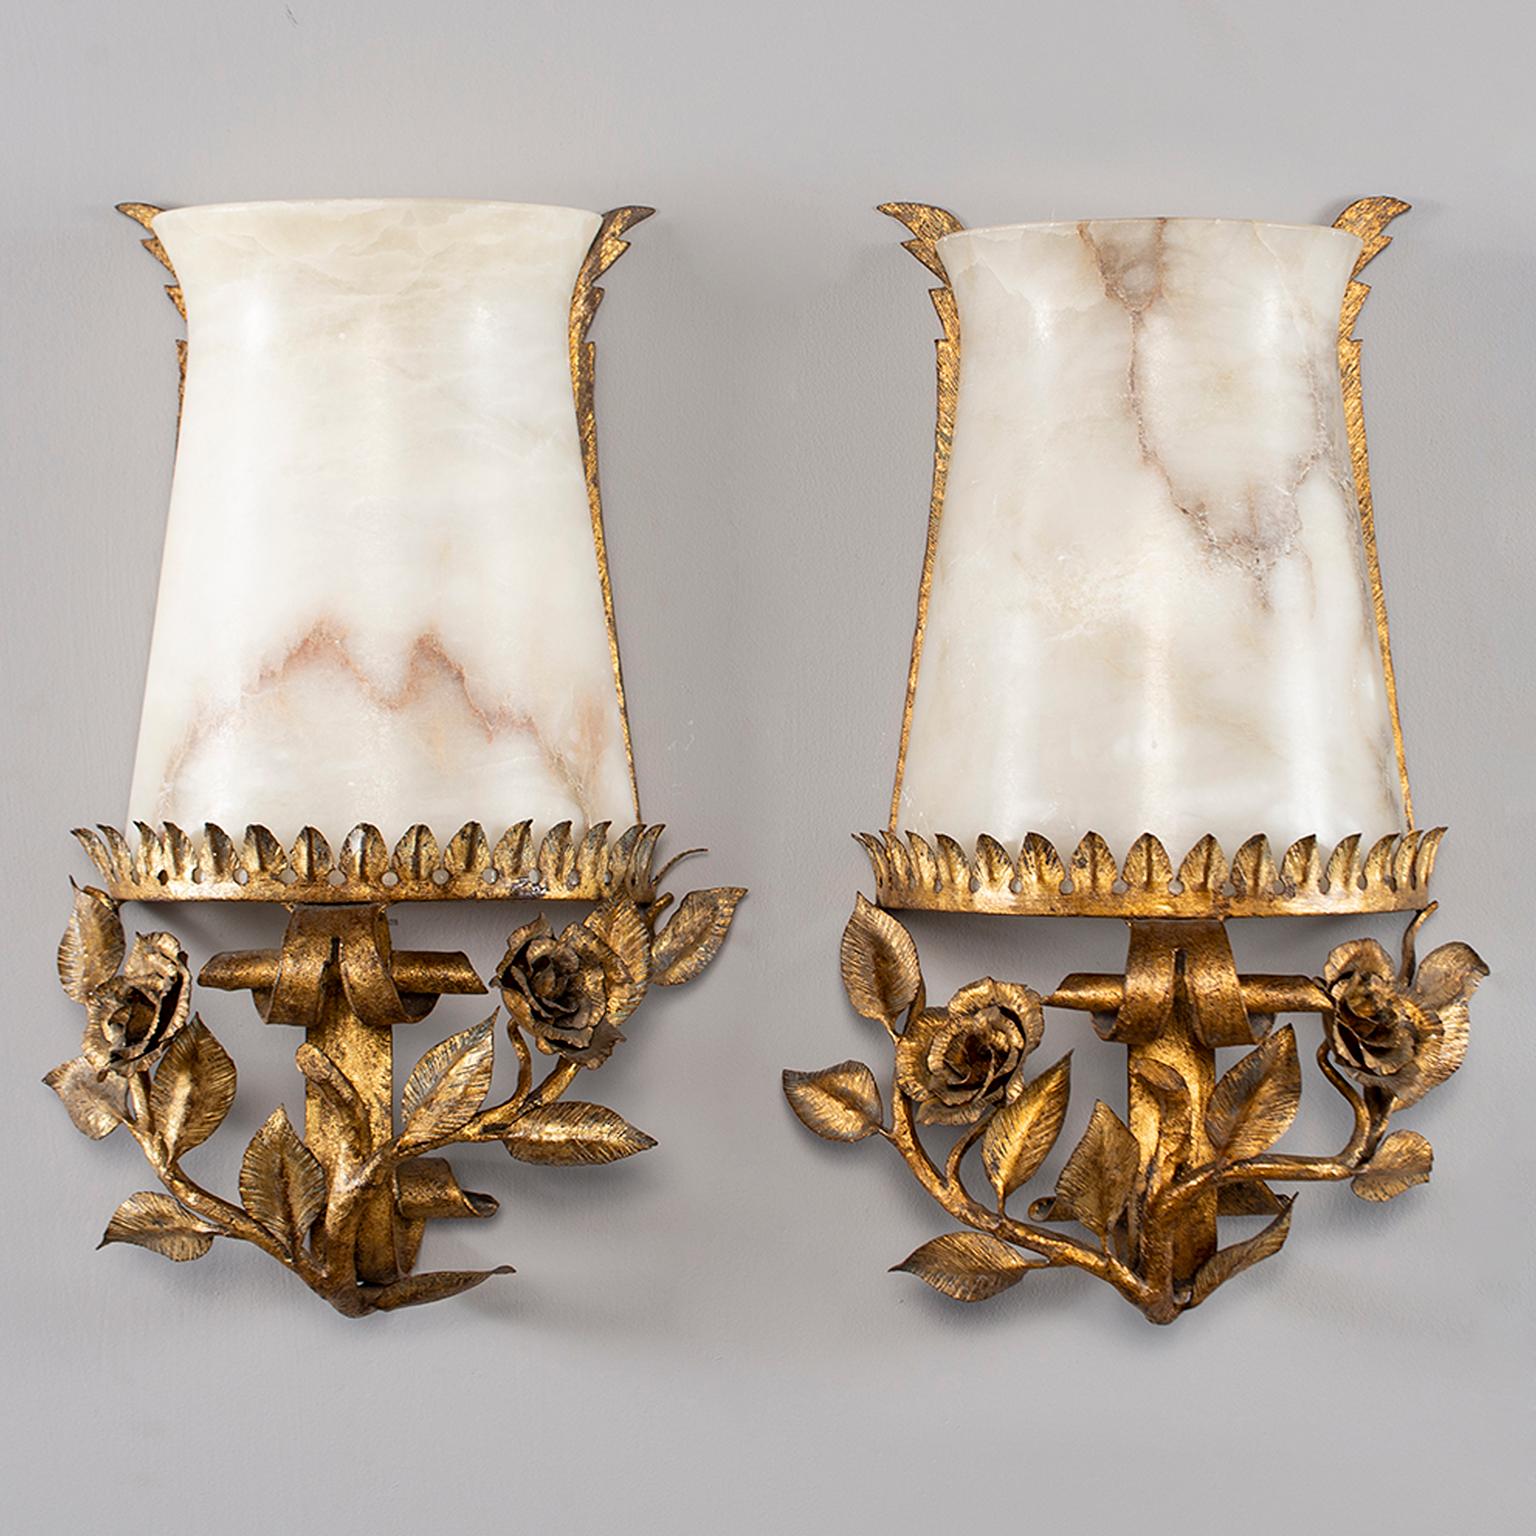 Pair of Italian sconces have metal bases depicting sculpted roses and leaves with a gilt finish and alabaster globes, circa 1940s. Each sconce has a single candelabra sized socket. Electrical wiring has been updated for US standards. Sold and priced